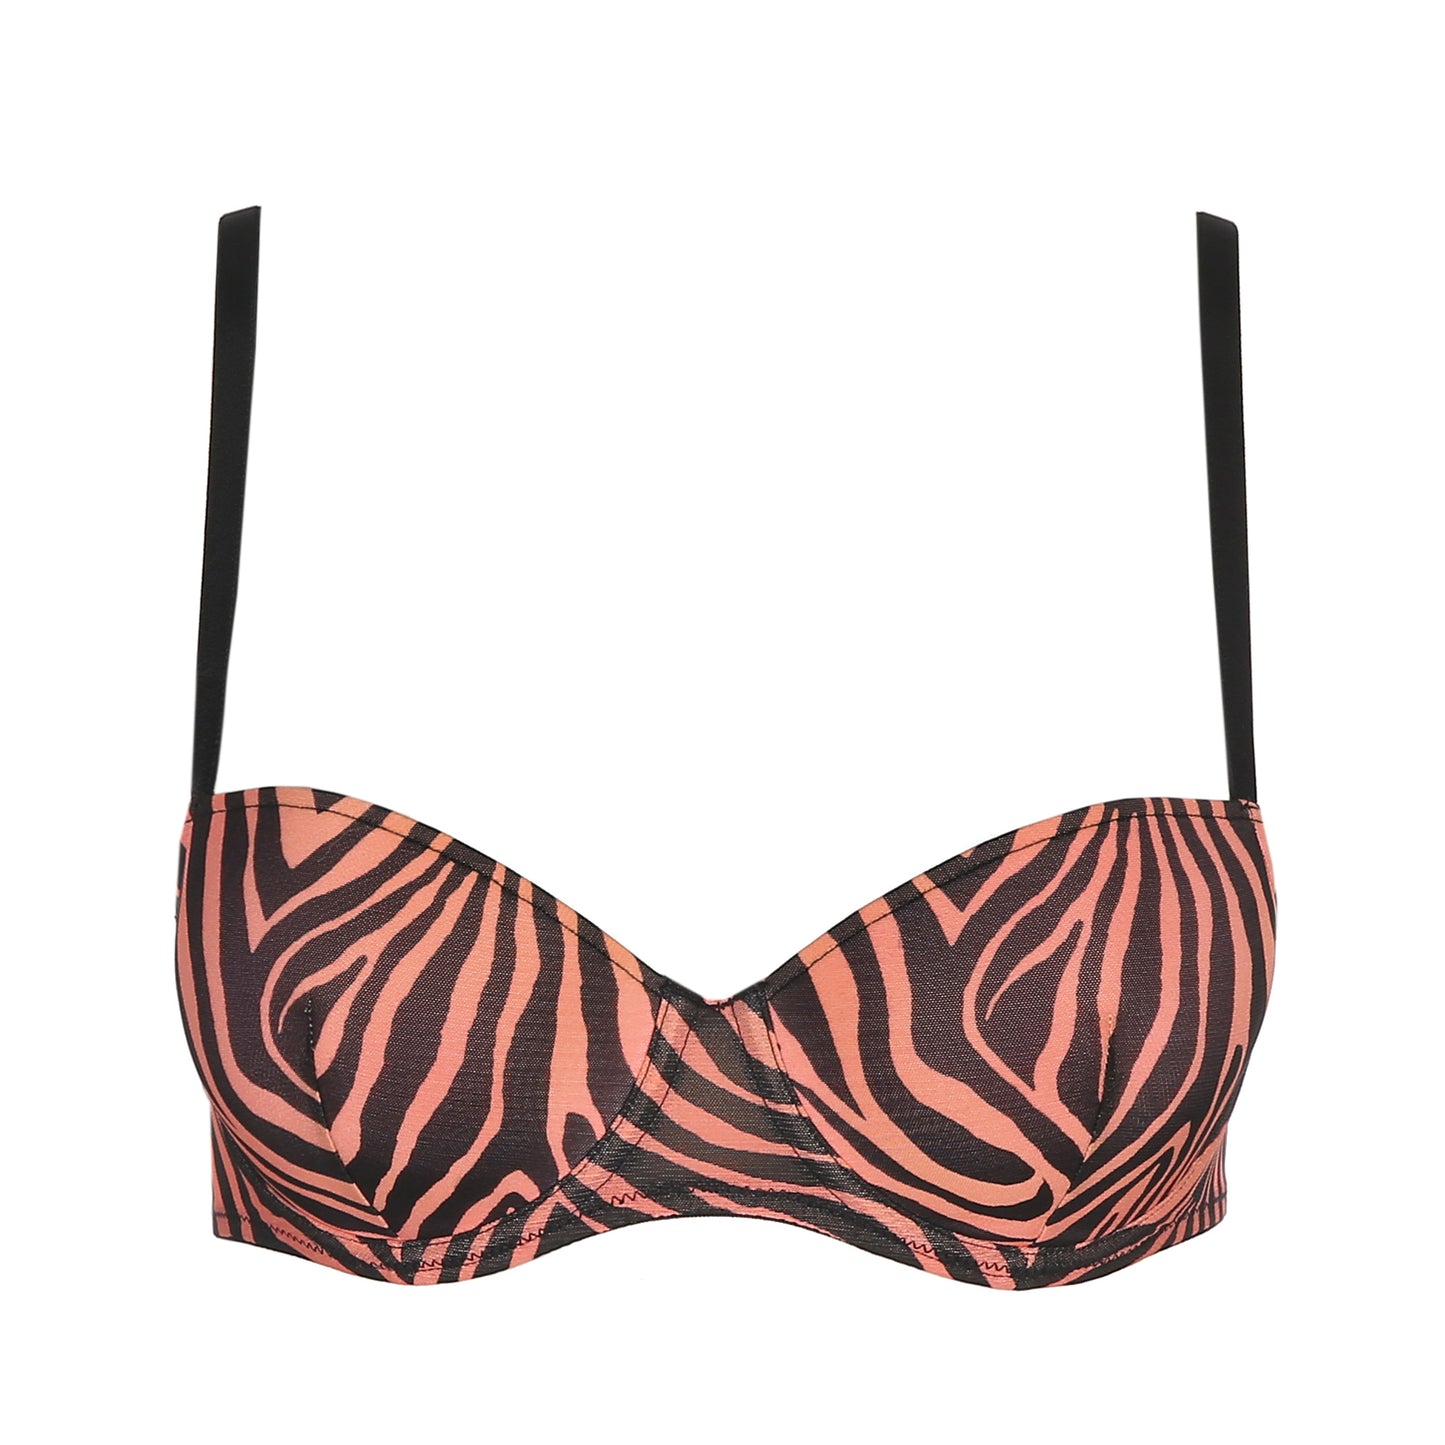 Tristan Padded Balcony Bra - Fusion front view